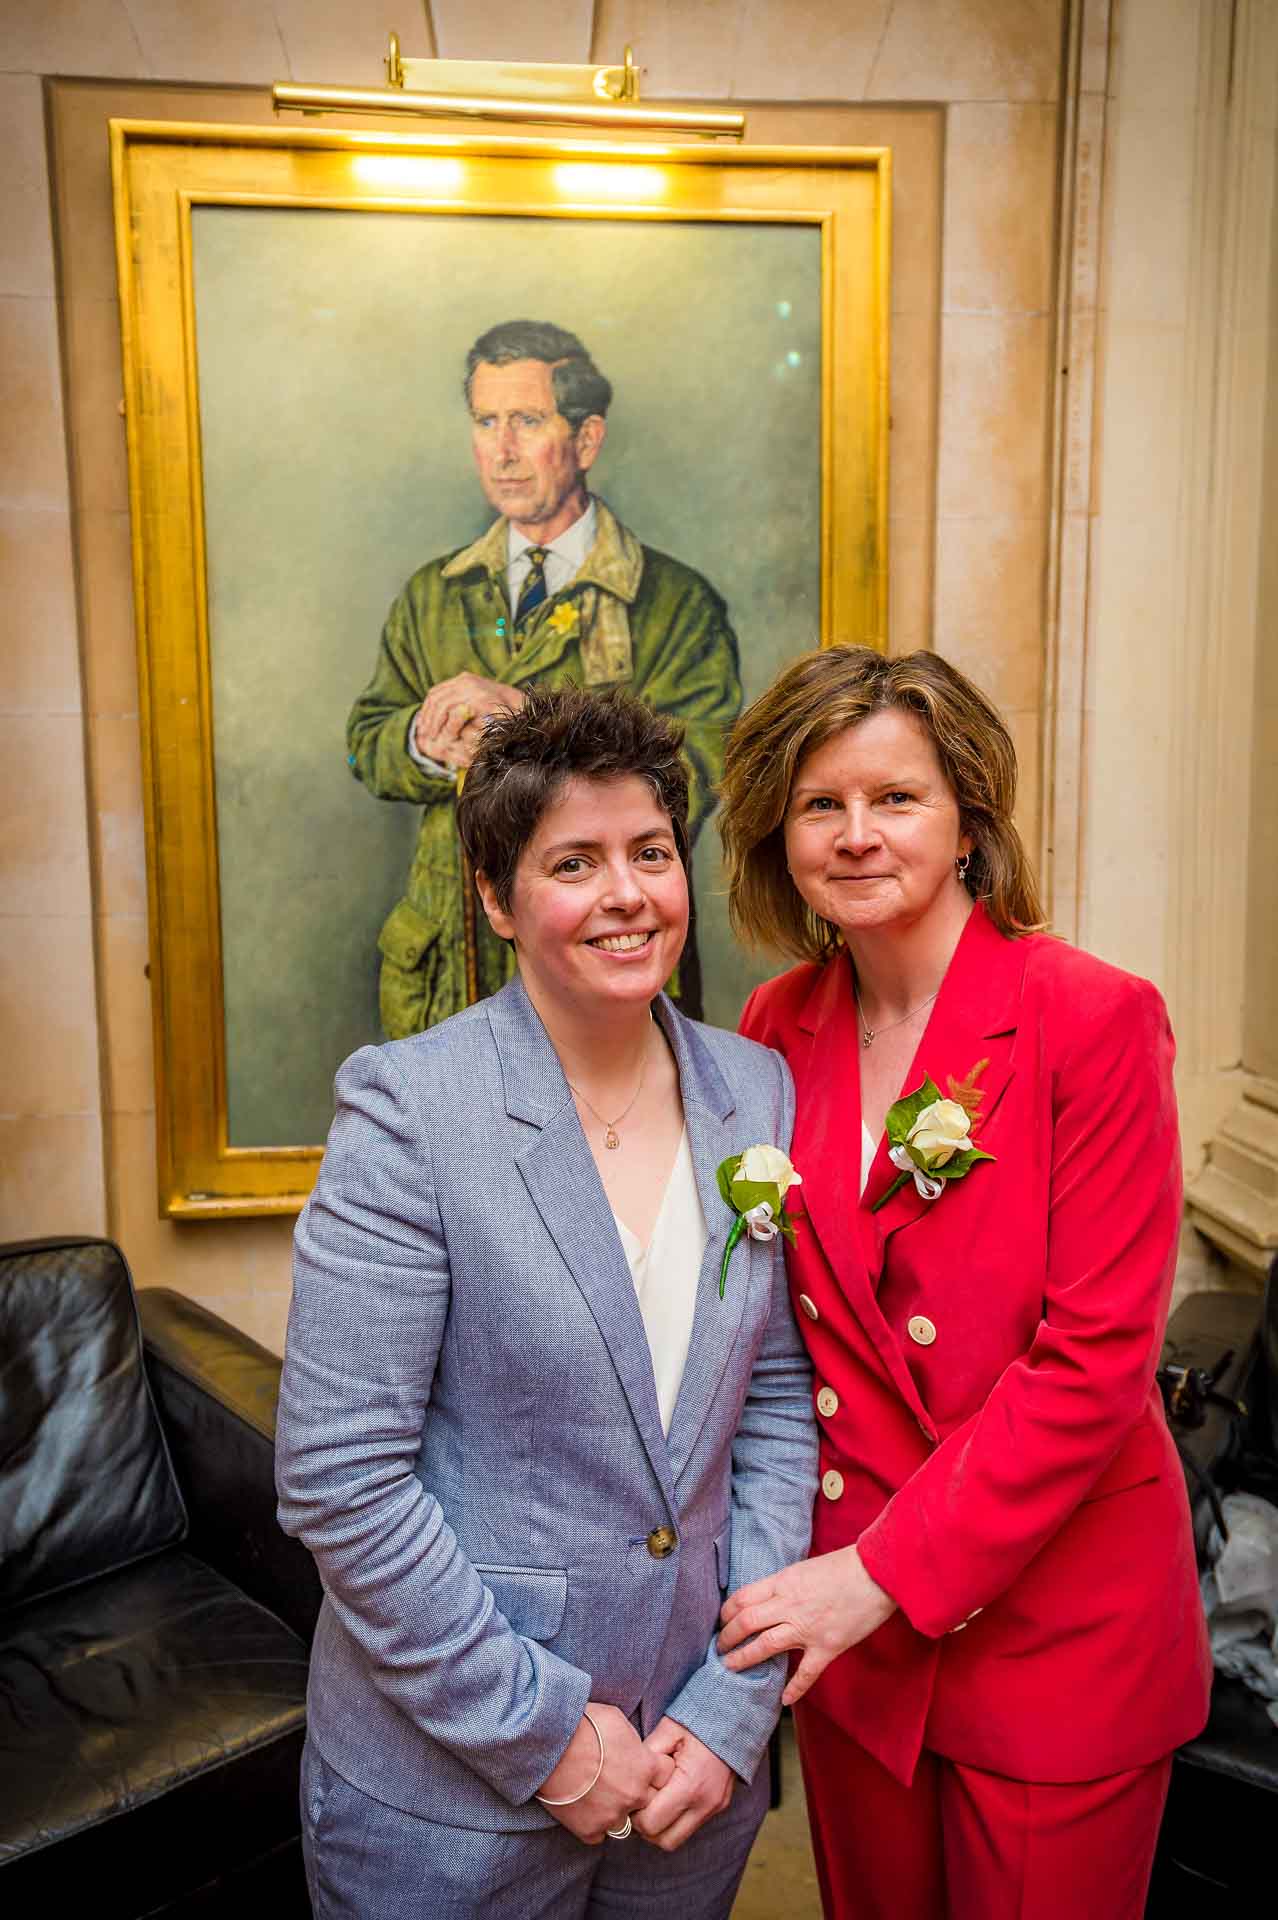 Female LGBT couple in front of portrait of the Prince of Wales